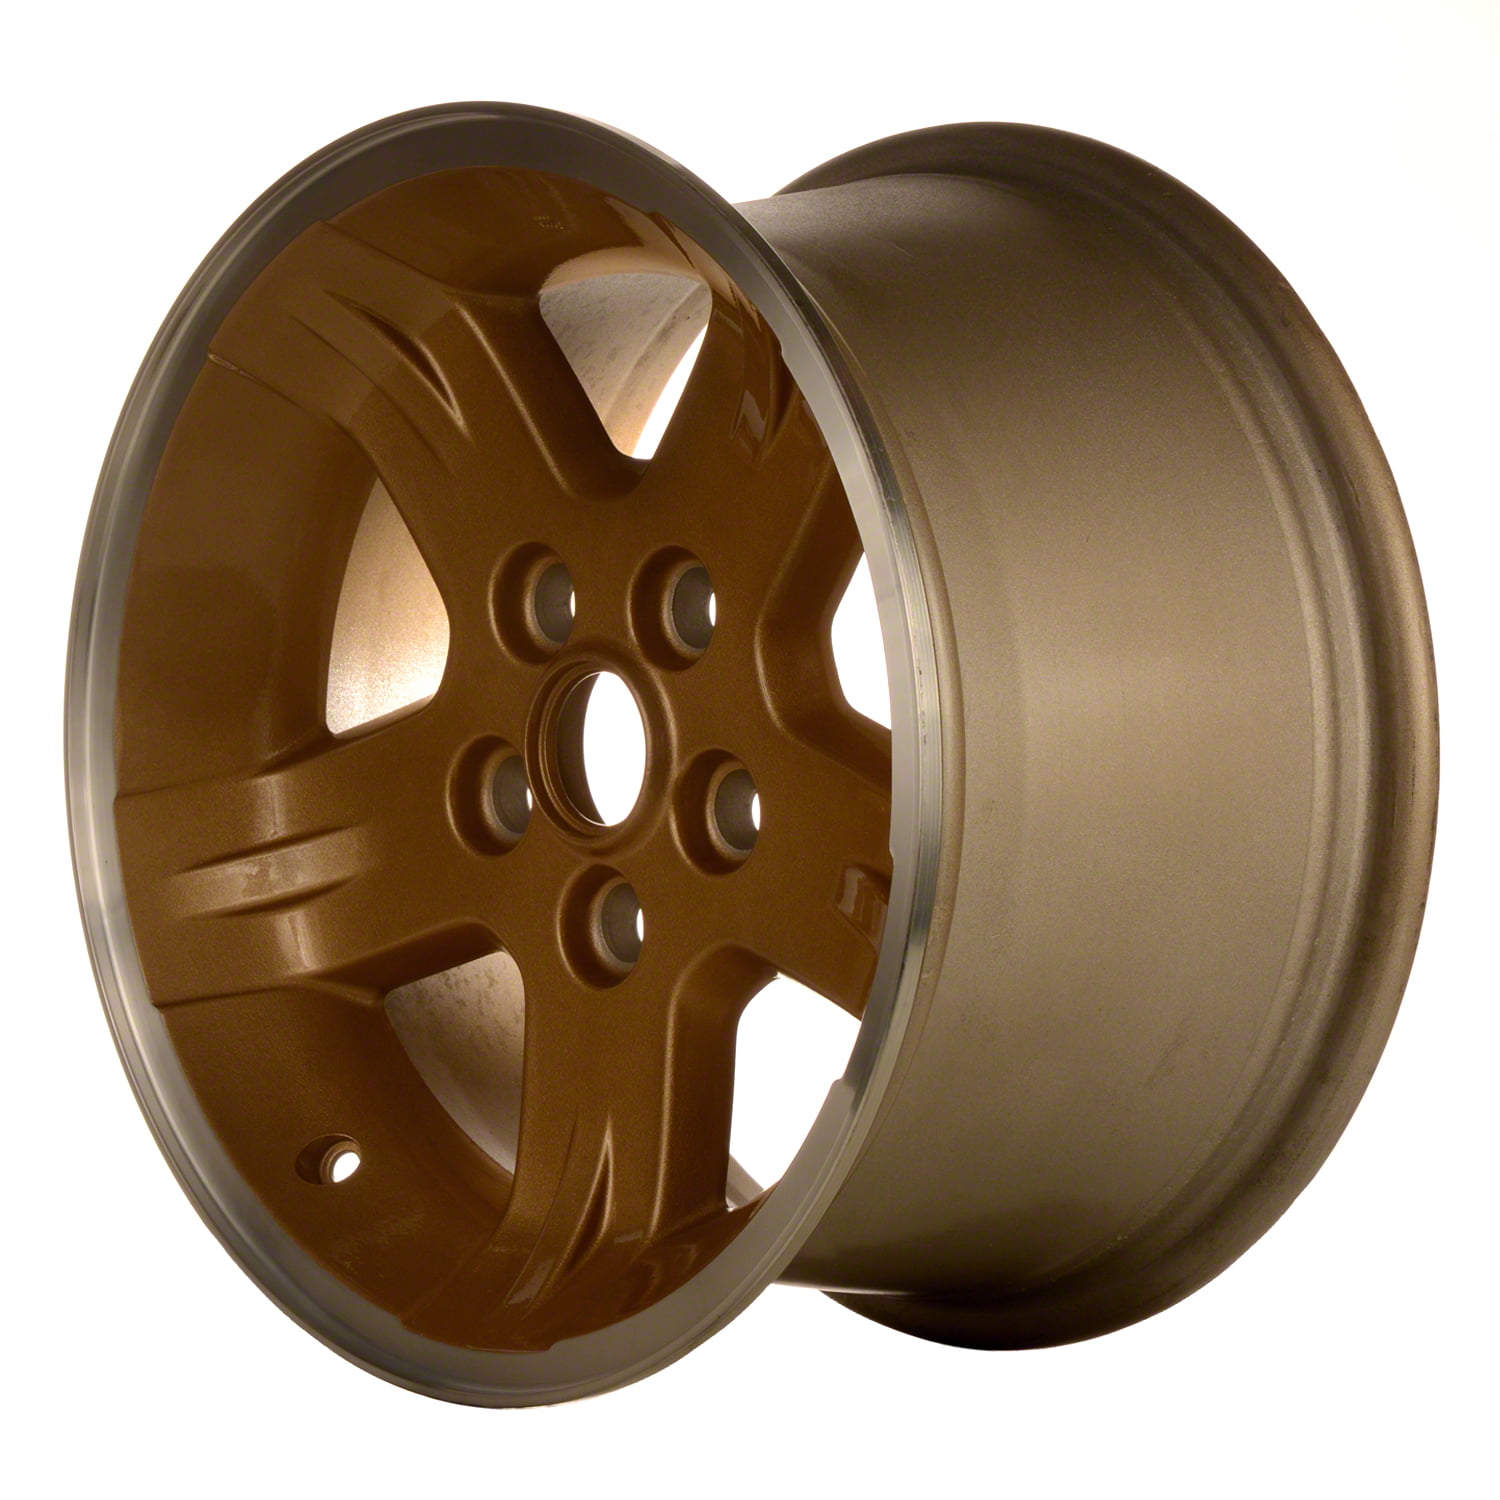 15 X 8 Reconditioned OEM Aluminum Alloy Wheel, Flange Cut W/Gold Face, Fits  2004-2006 Jeep Wrangler 